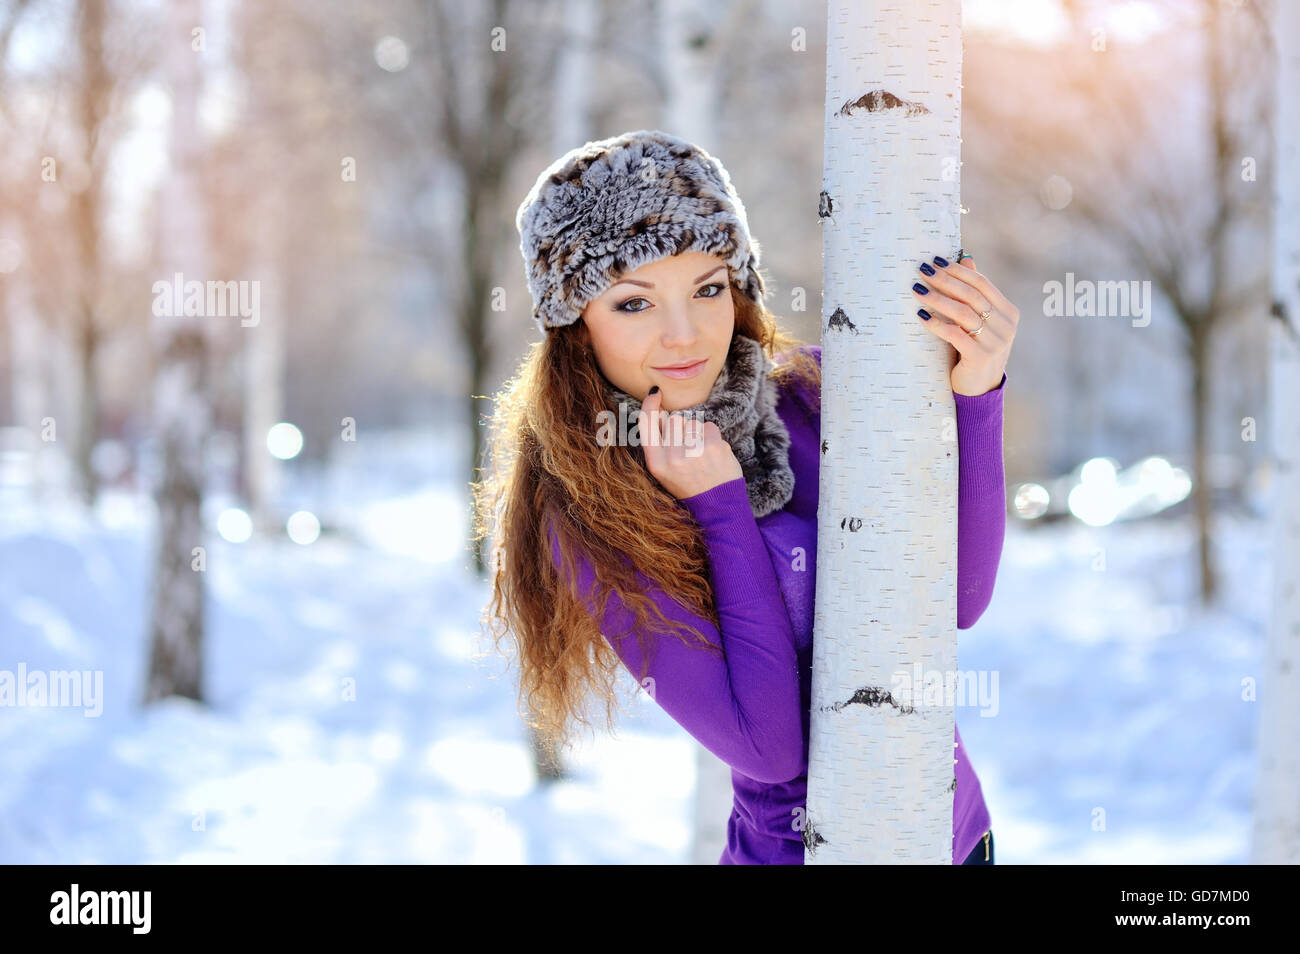 portrait of a young woman in winter park Stock Photo